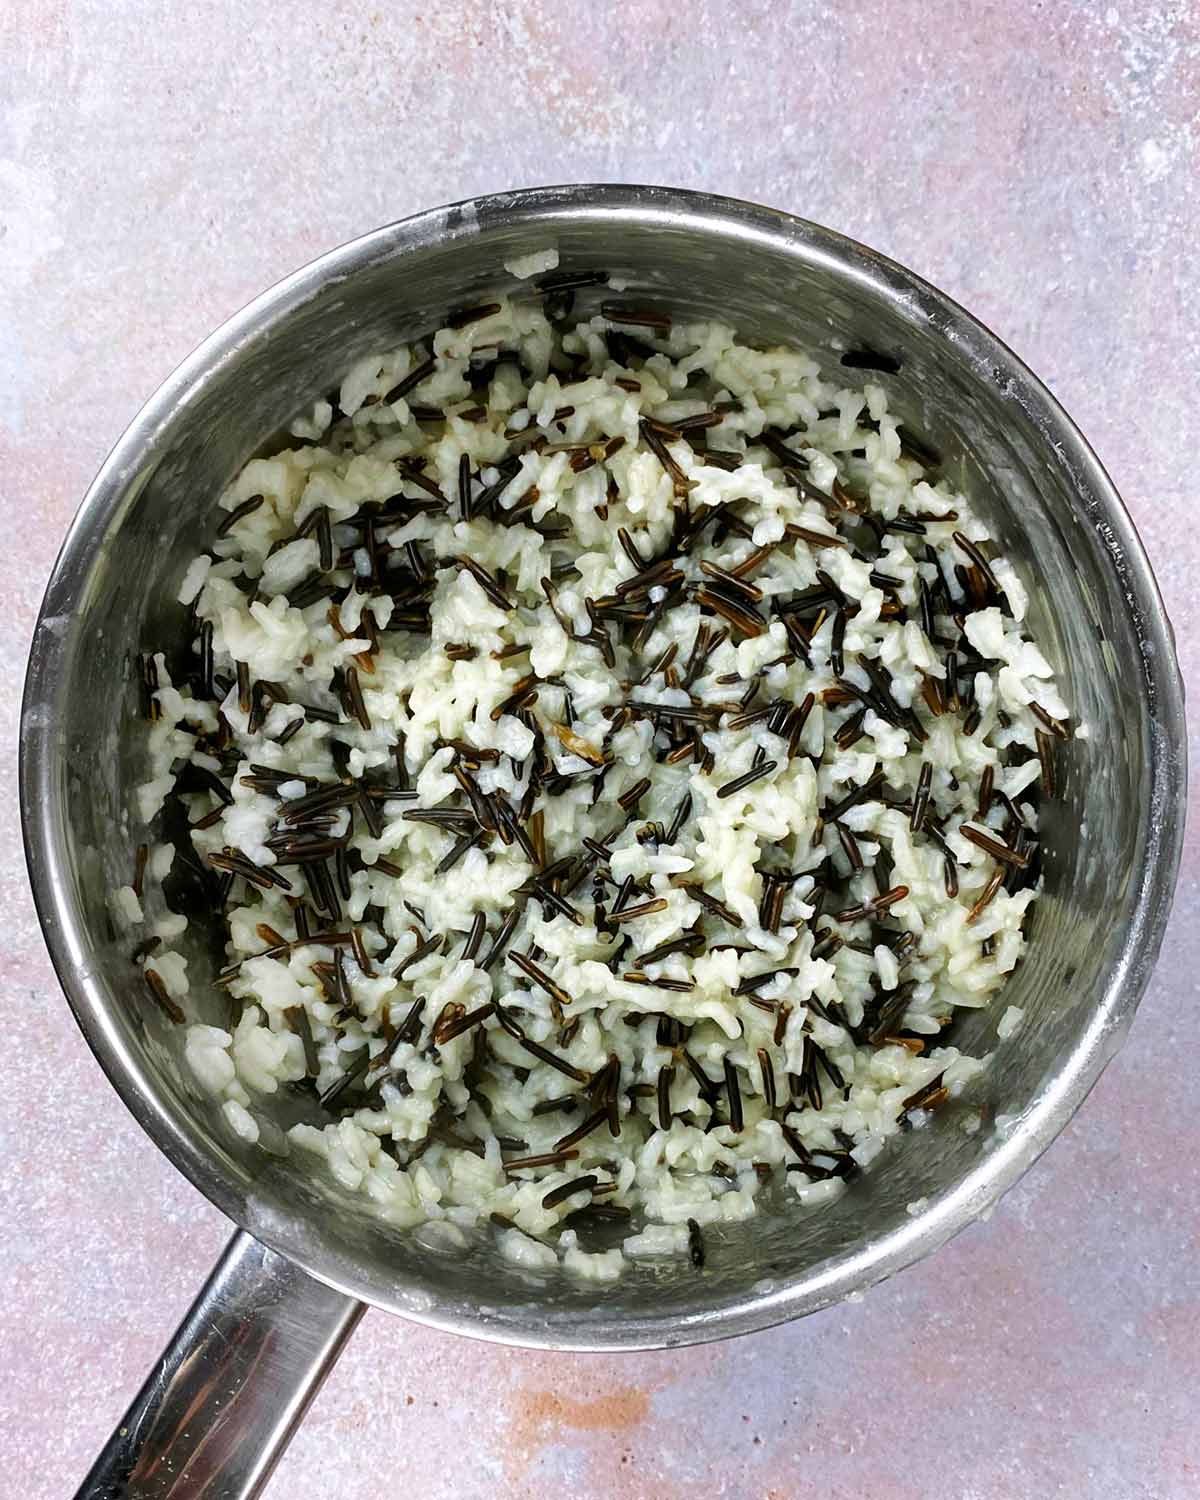 A saucepan containing cooked black and white rice.